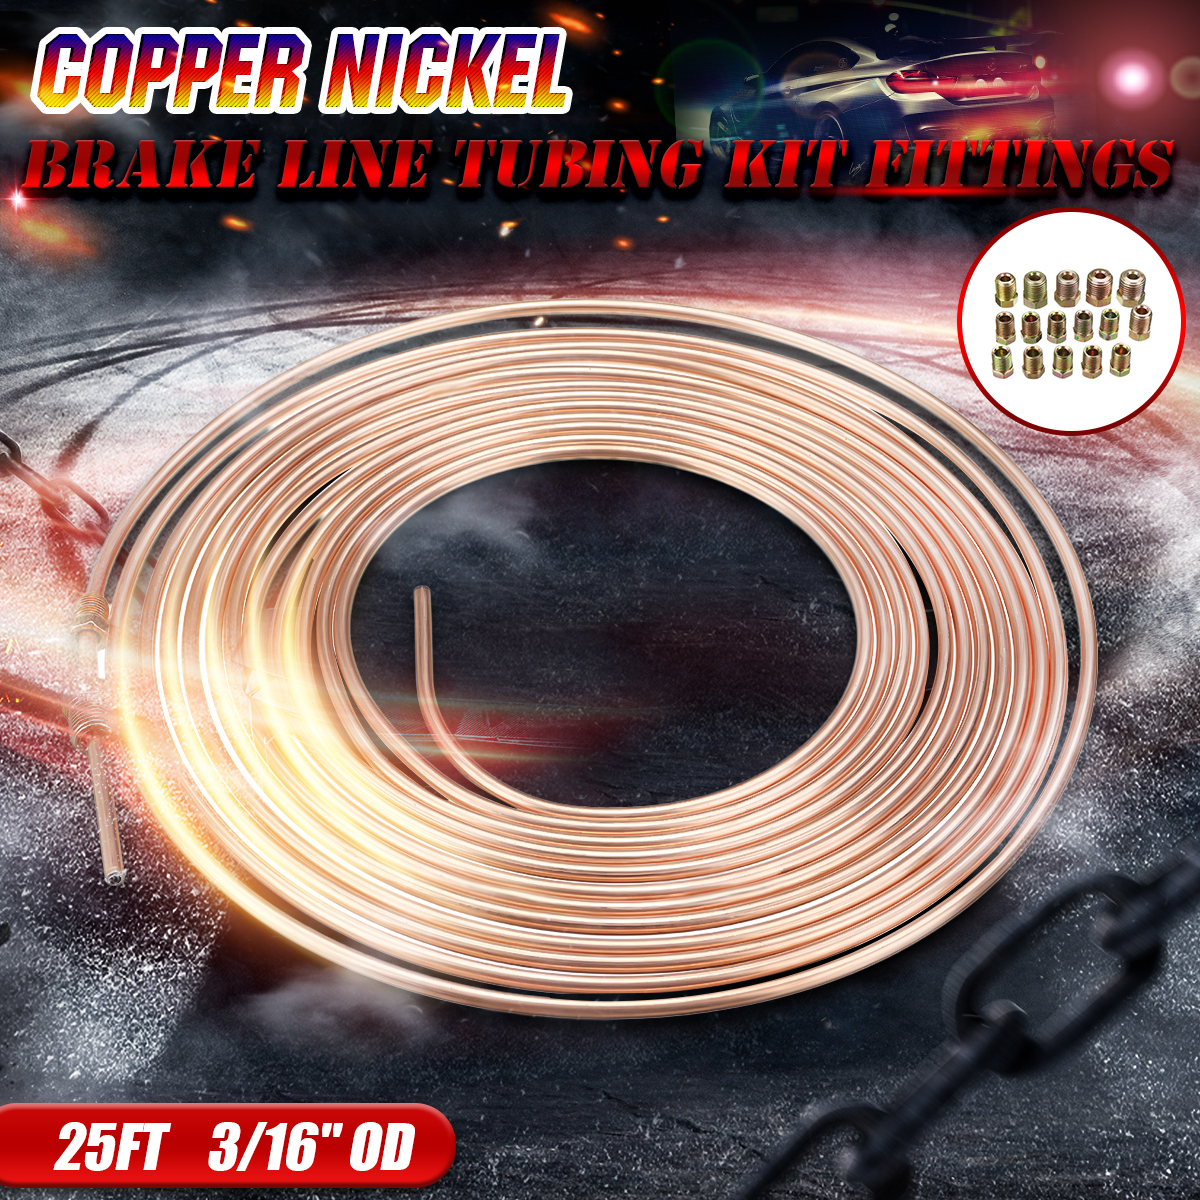 Universal-25Ft-Copper-Nickel-Brake-Line-Tubing-Kit-316quot-OD-with-15Pcs-Nuts-1586631-2